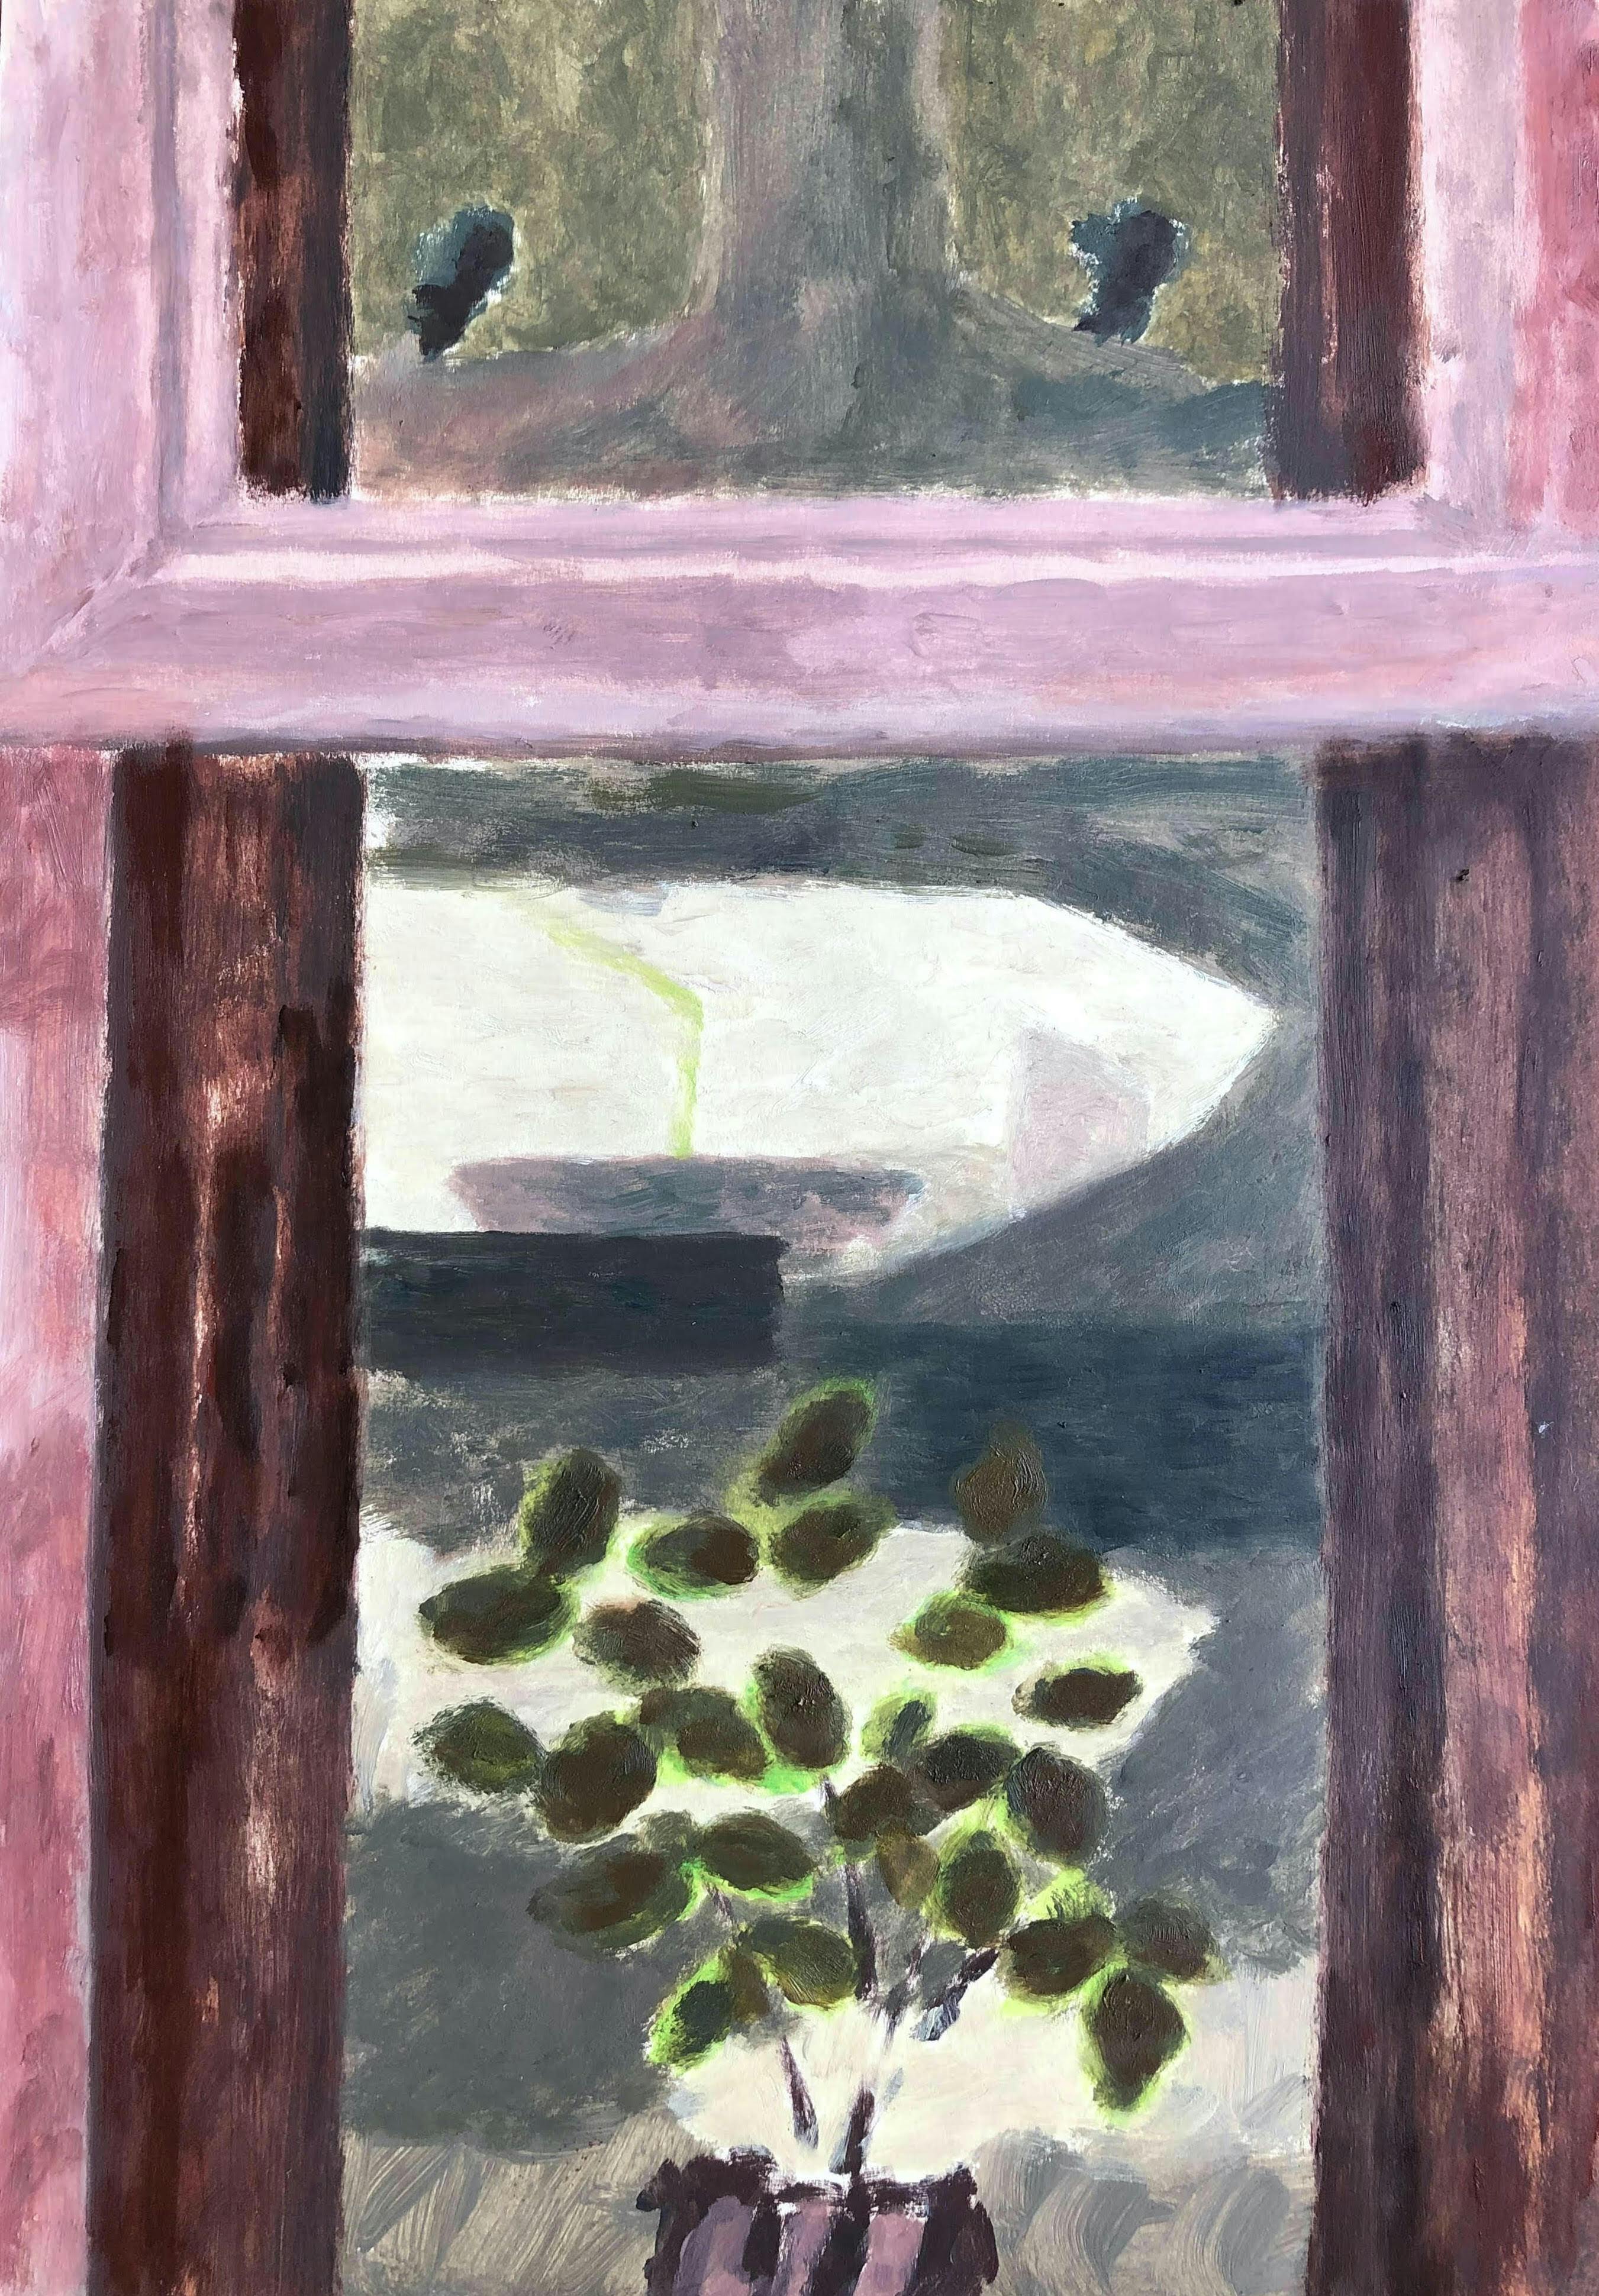 Untitled, 2022. Oil on paper, 21.5 x 30cm